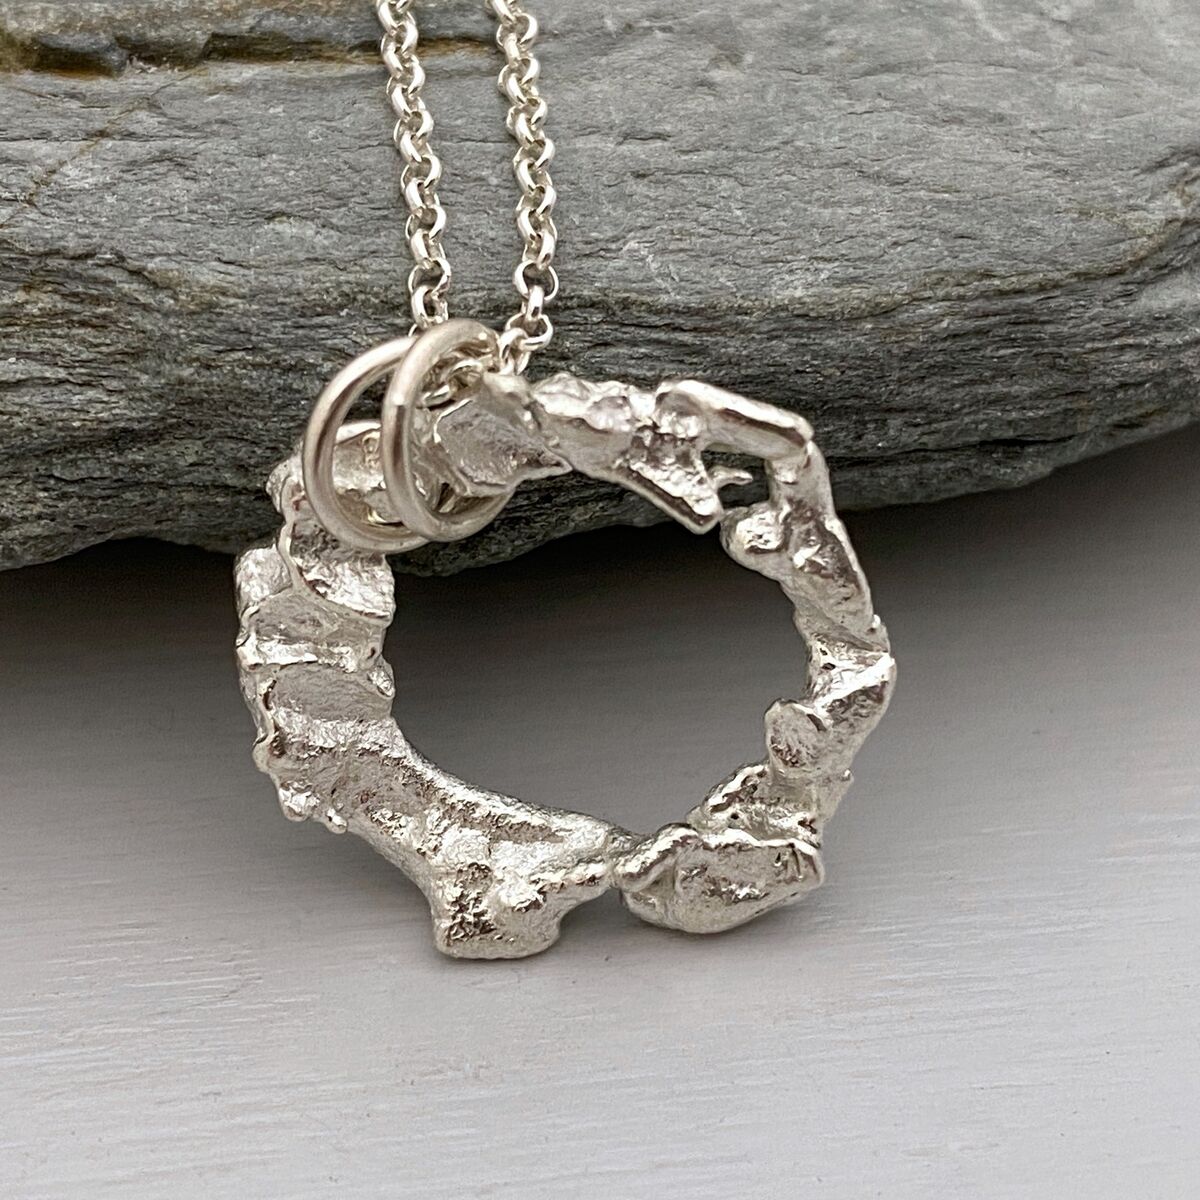 Recycled silver necklace